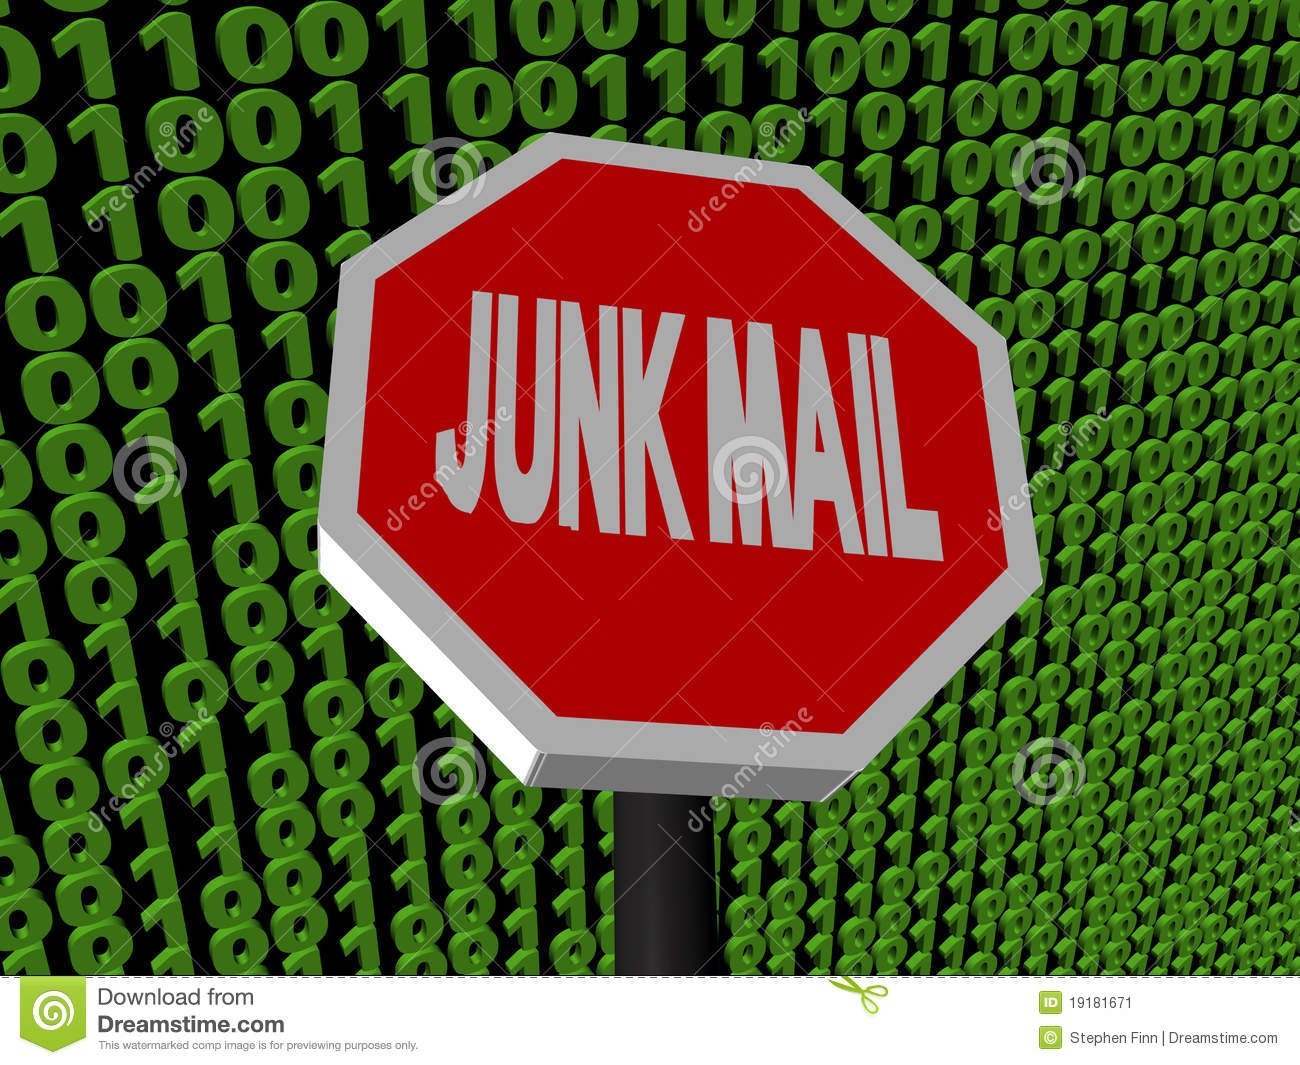 Stop Junk Mail Sign On Binary Stock Image   Image  19181671